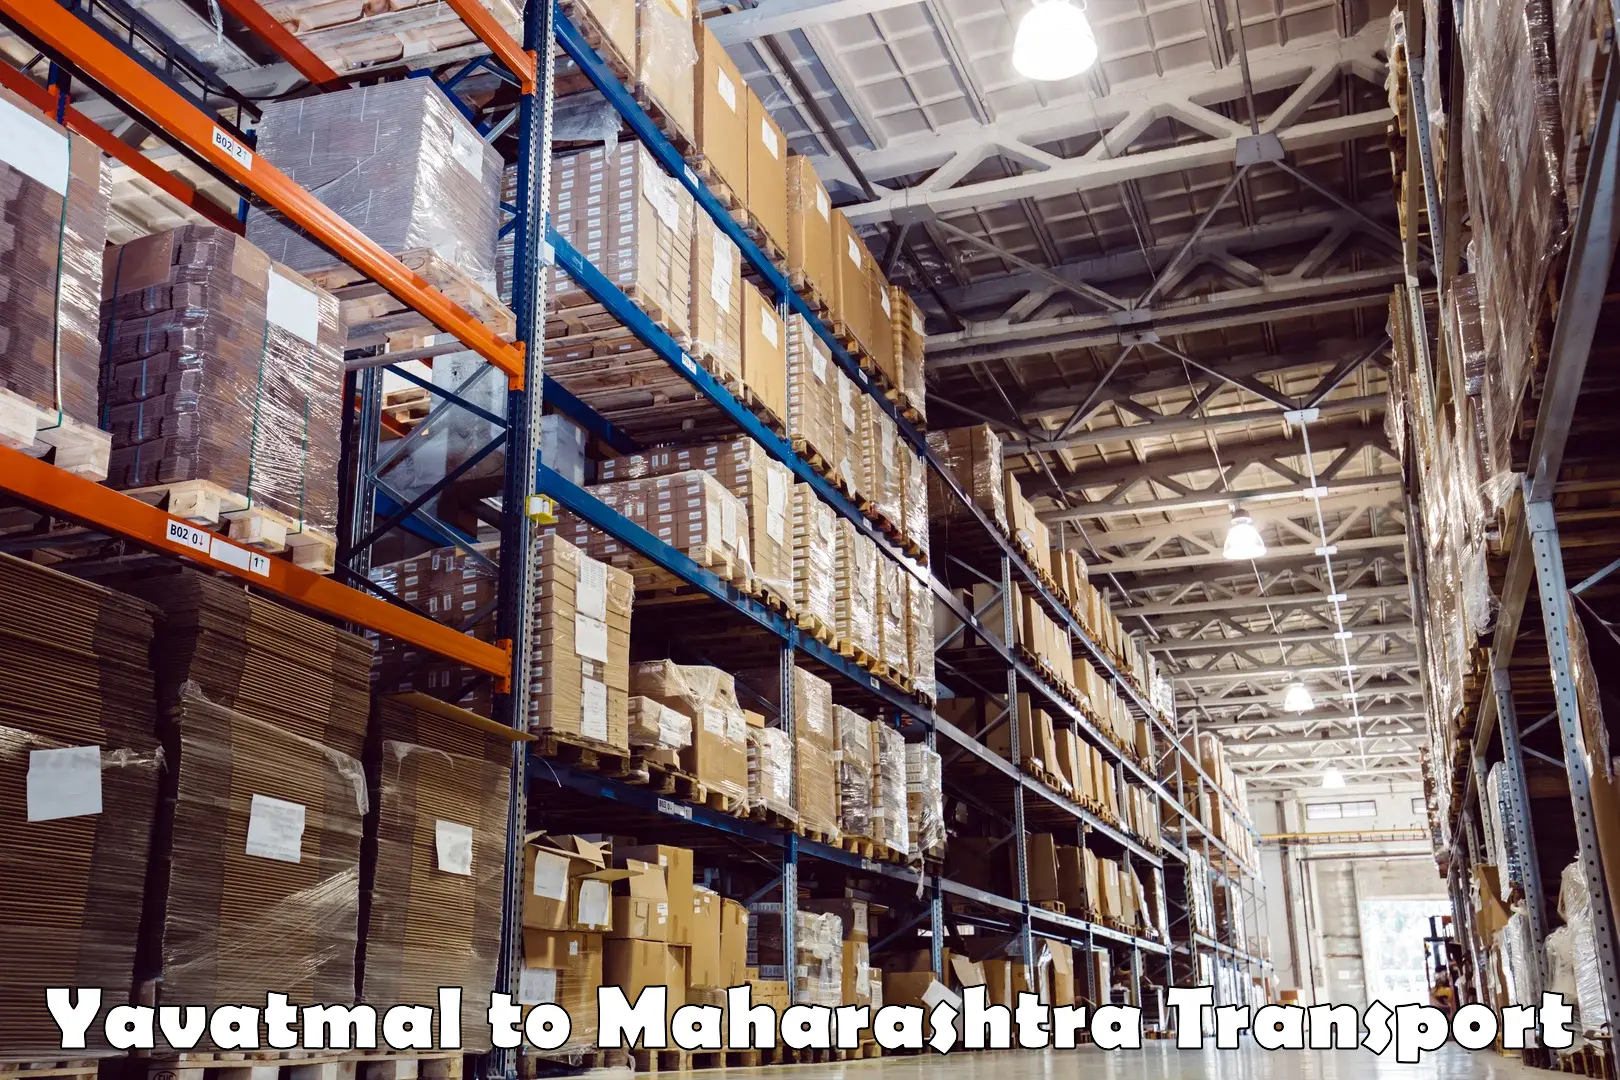 Air freight transport services in Yavatmal to Madgyal